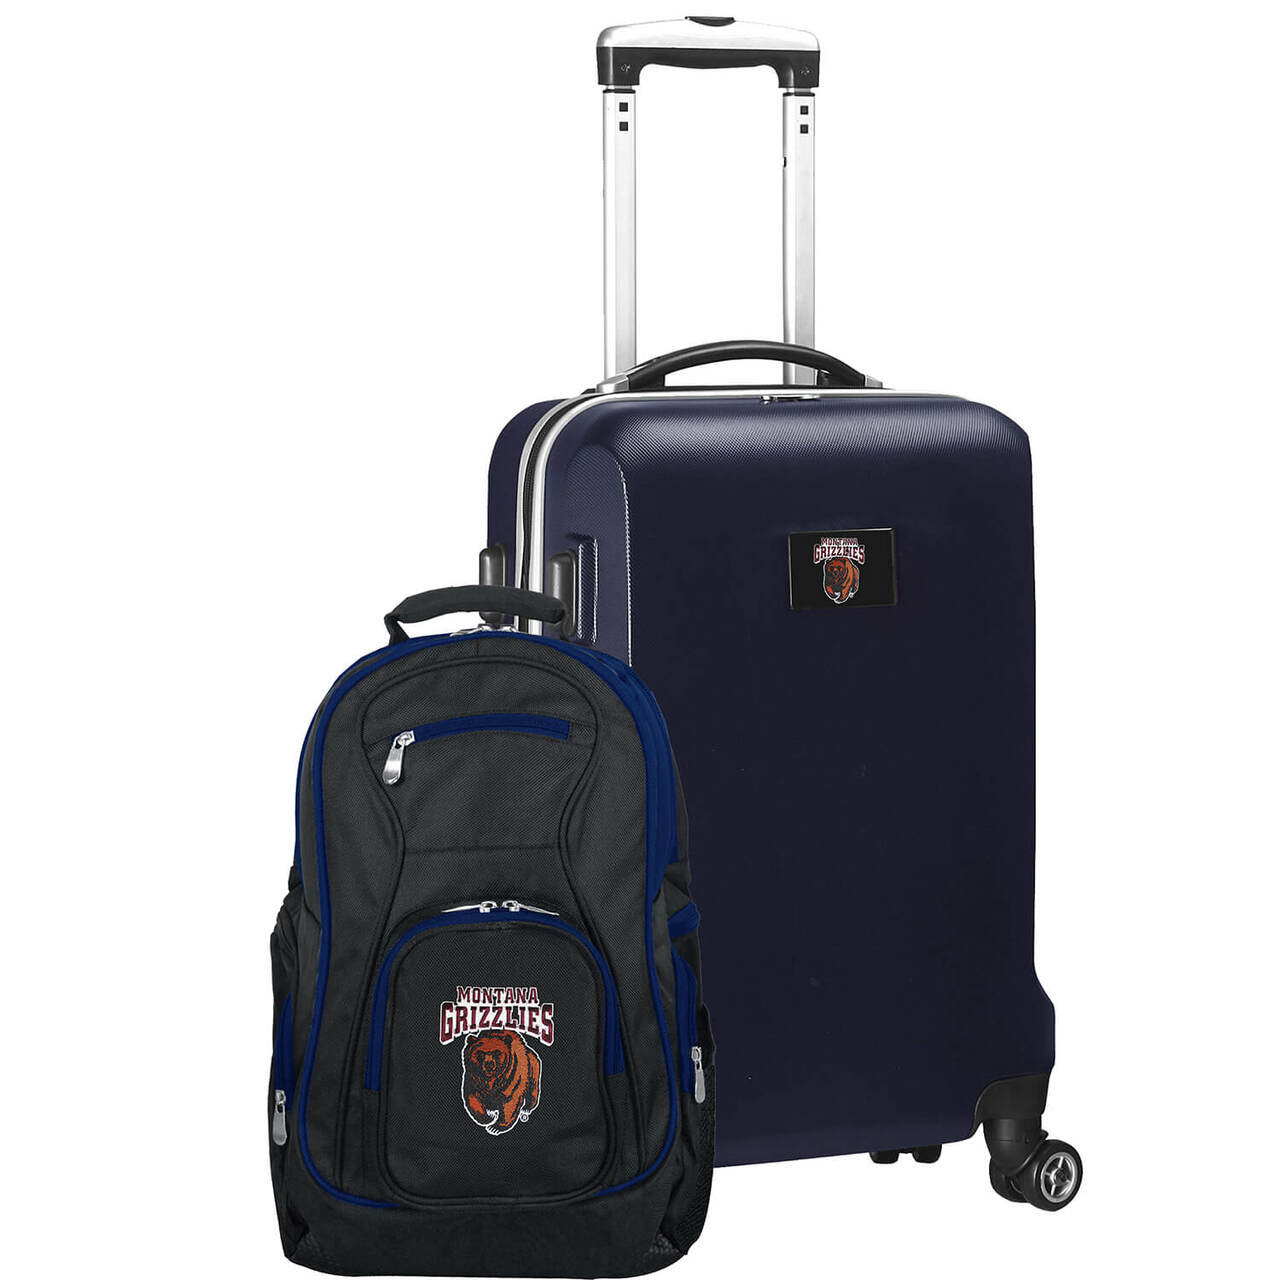 Montana Grizzlies Deluxe 2-Piece Backpack and Carry on Set in Navy